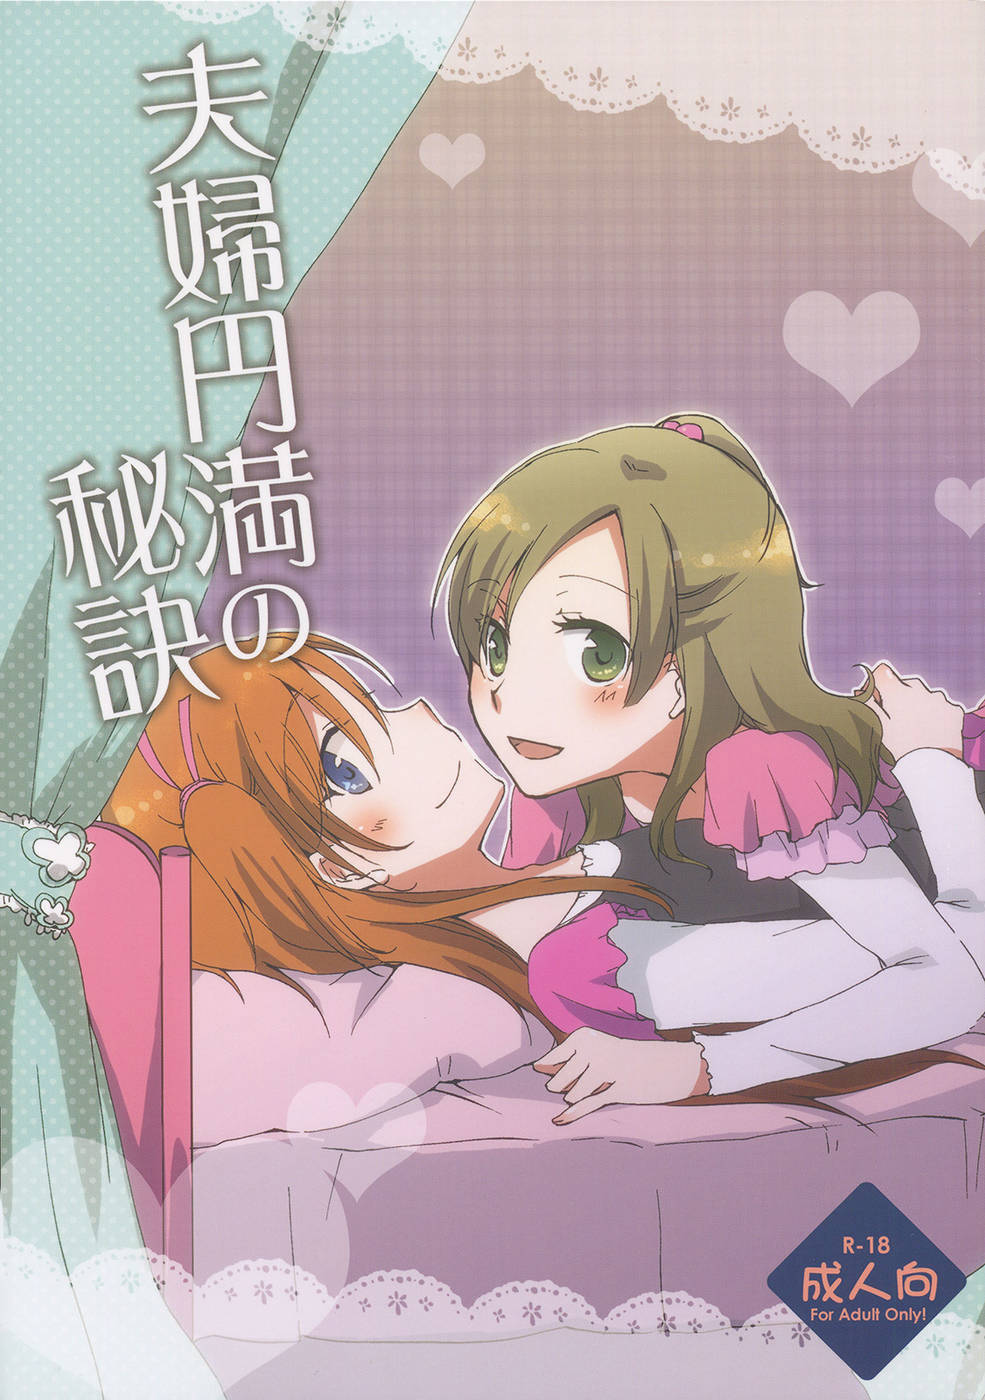 The Secret to a Happy Marriage by Niratama A Precure yuri doujin that contains small